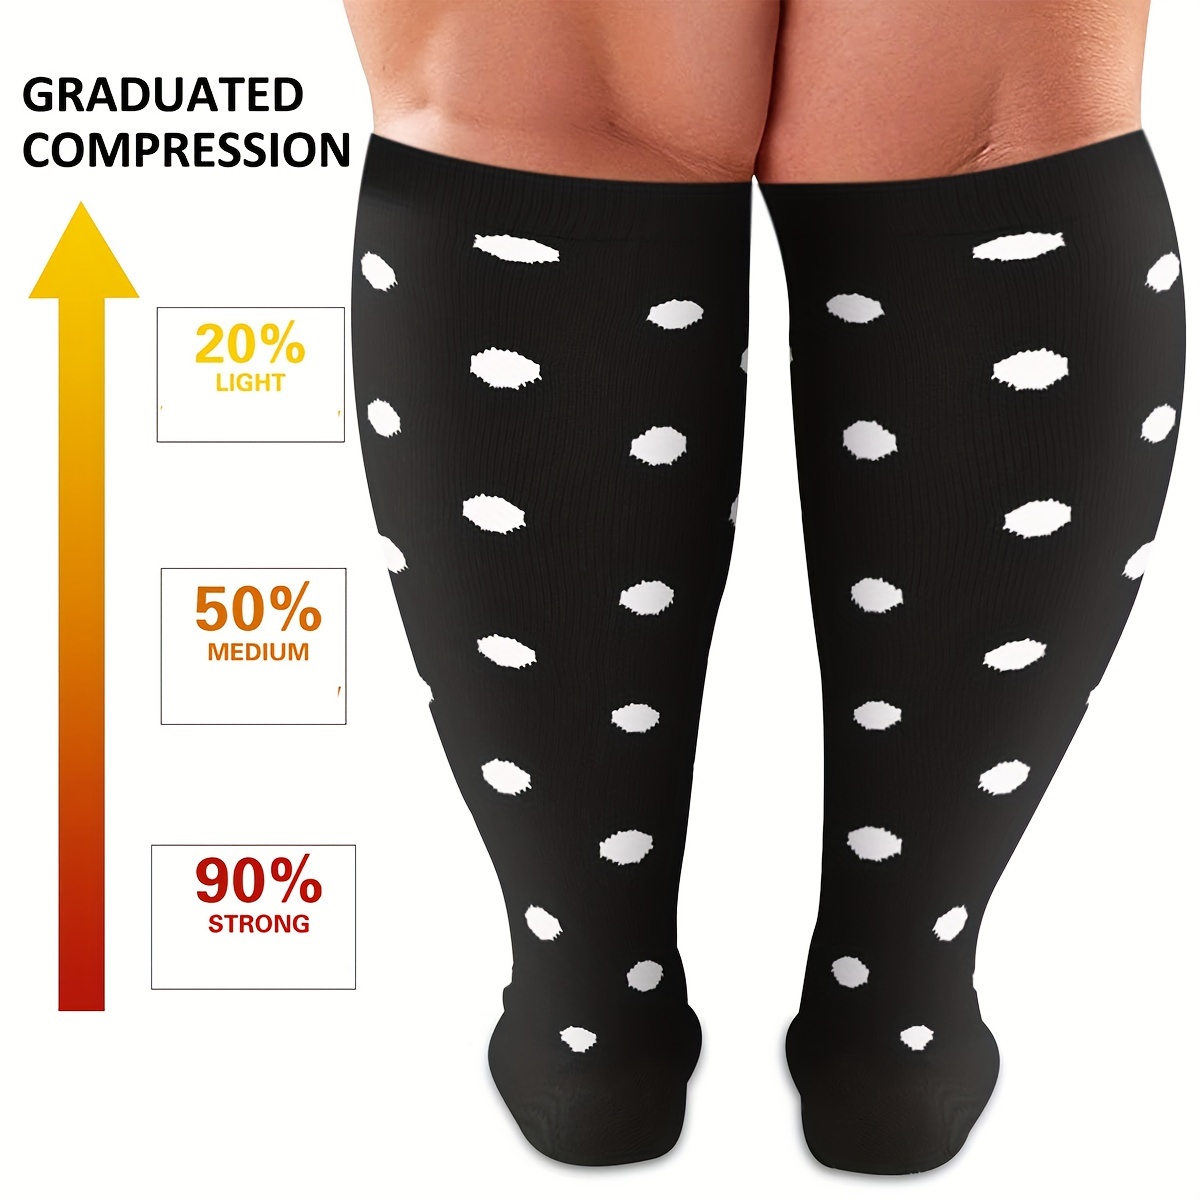 Plus Size Compression Tights for Women Circulation 20-30mmHg